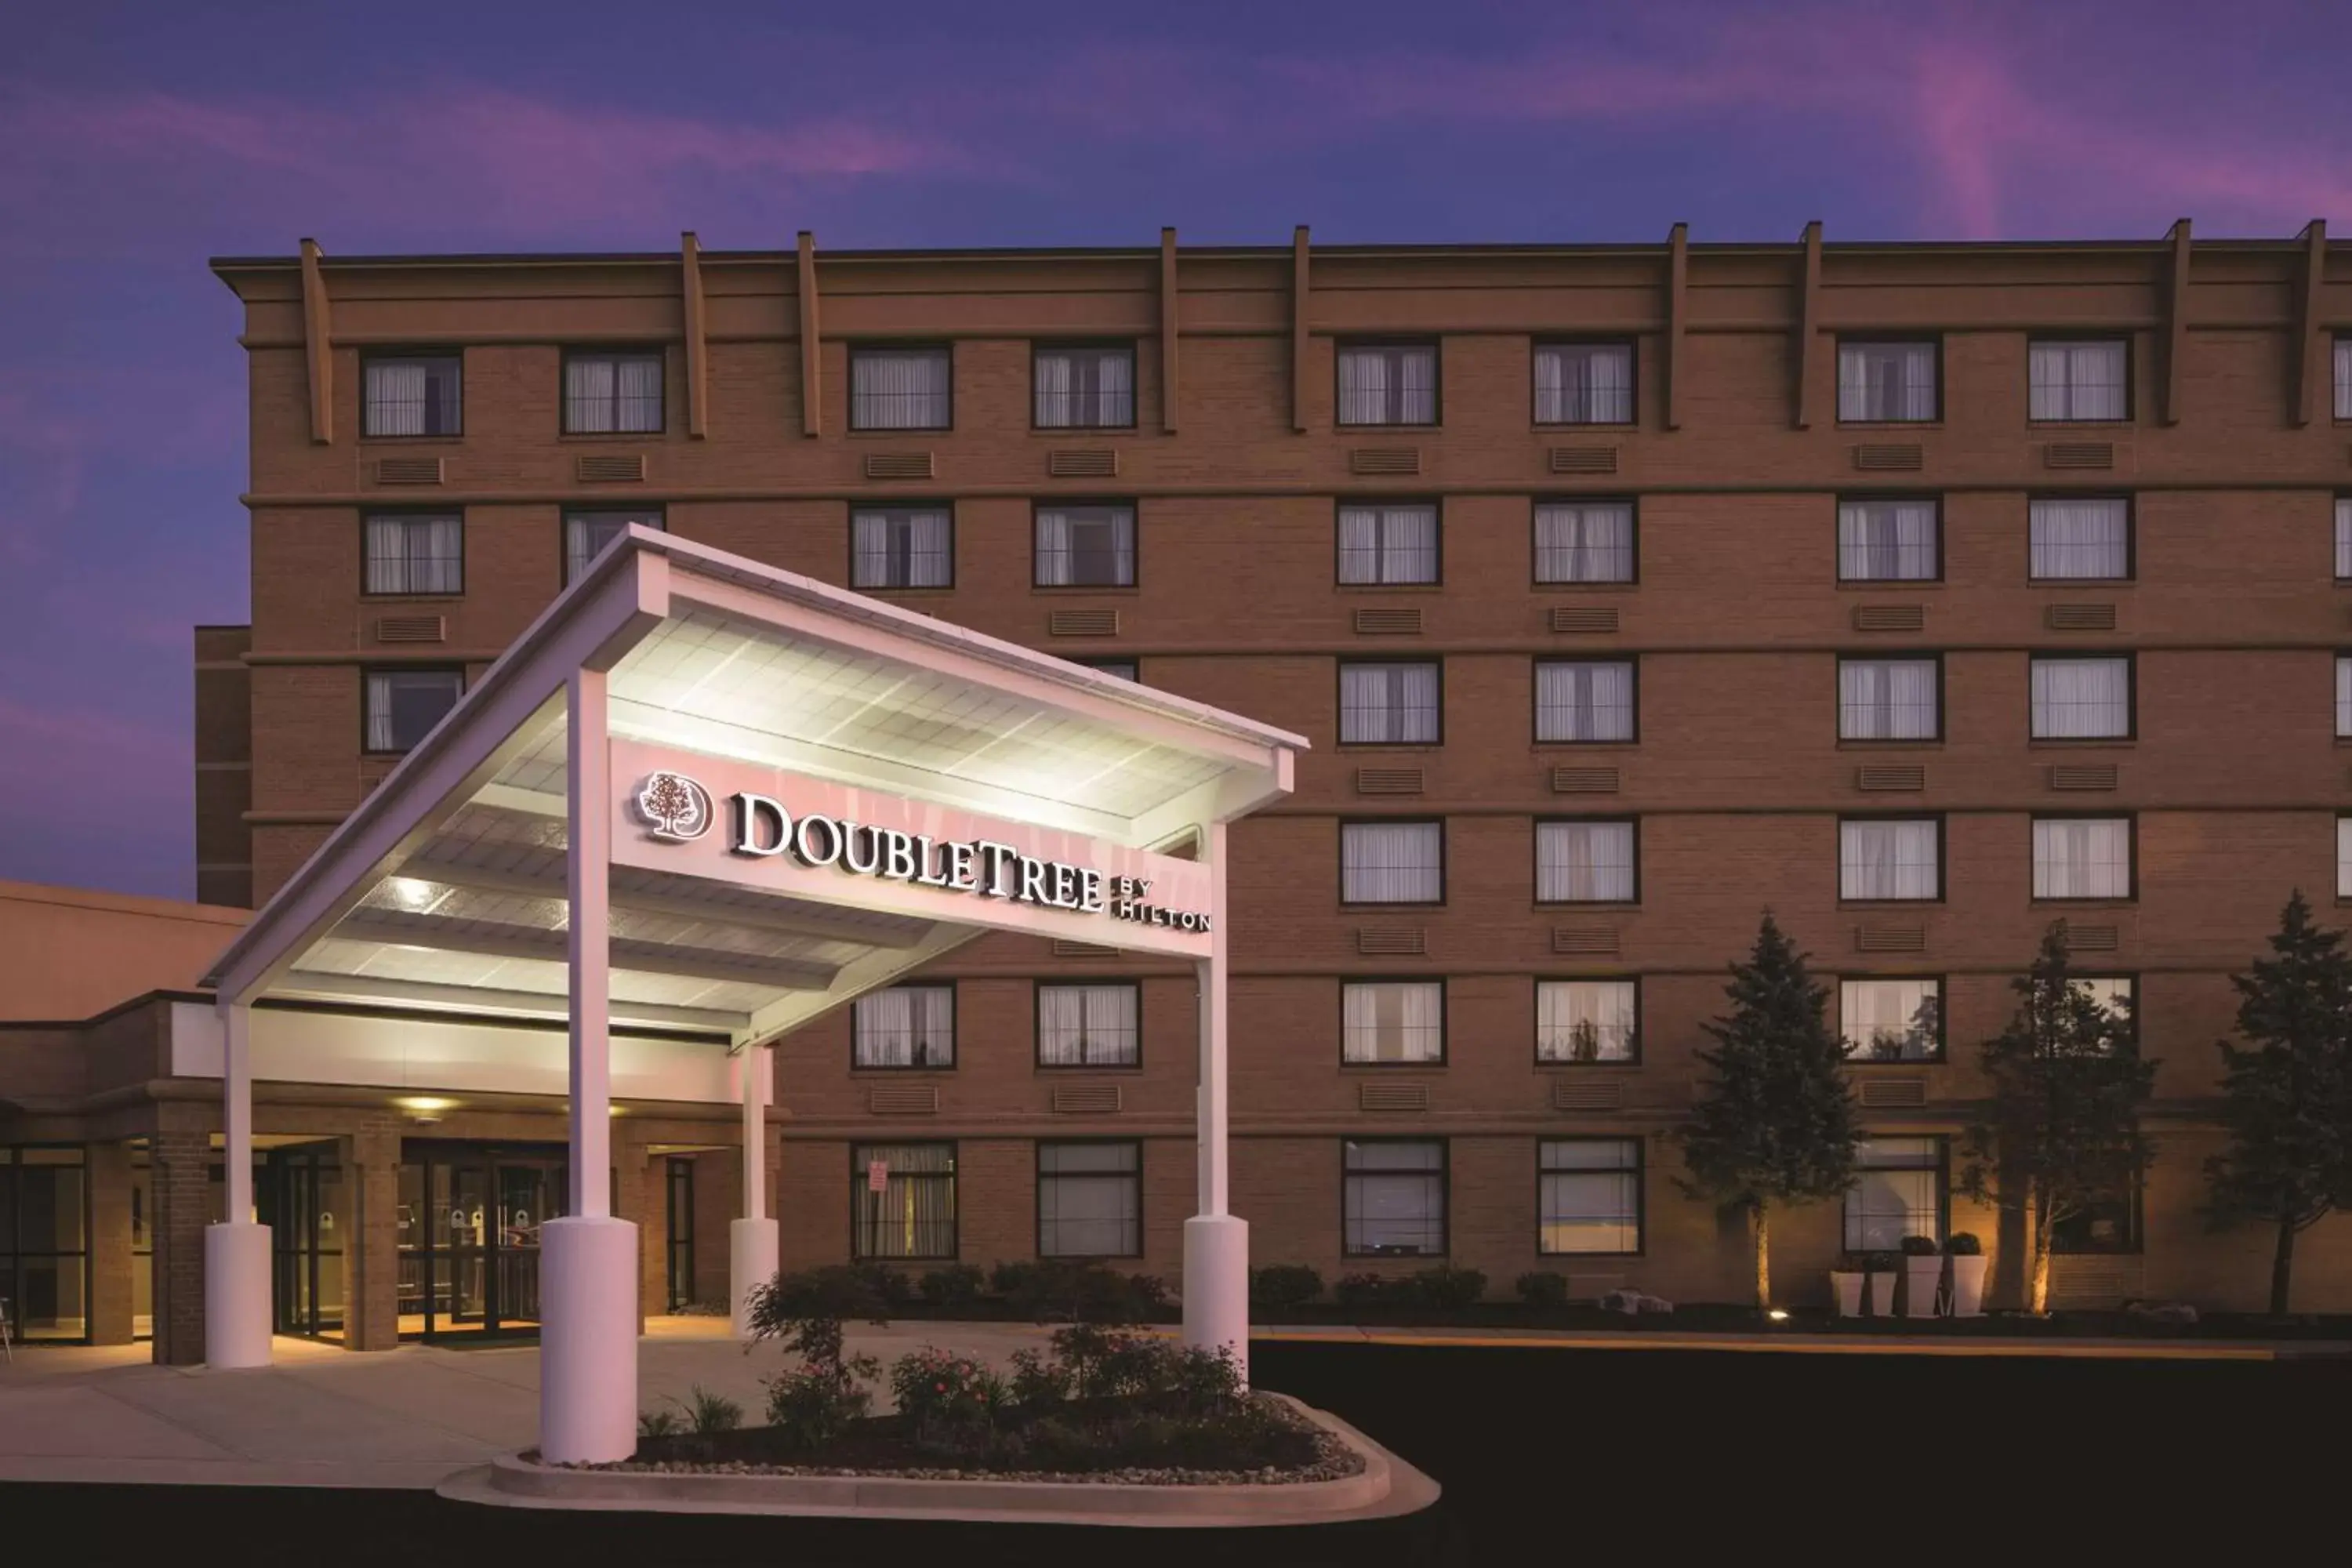 Property Building in Doubletree by Hilton Laurel, MD